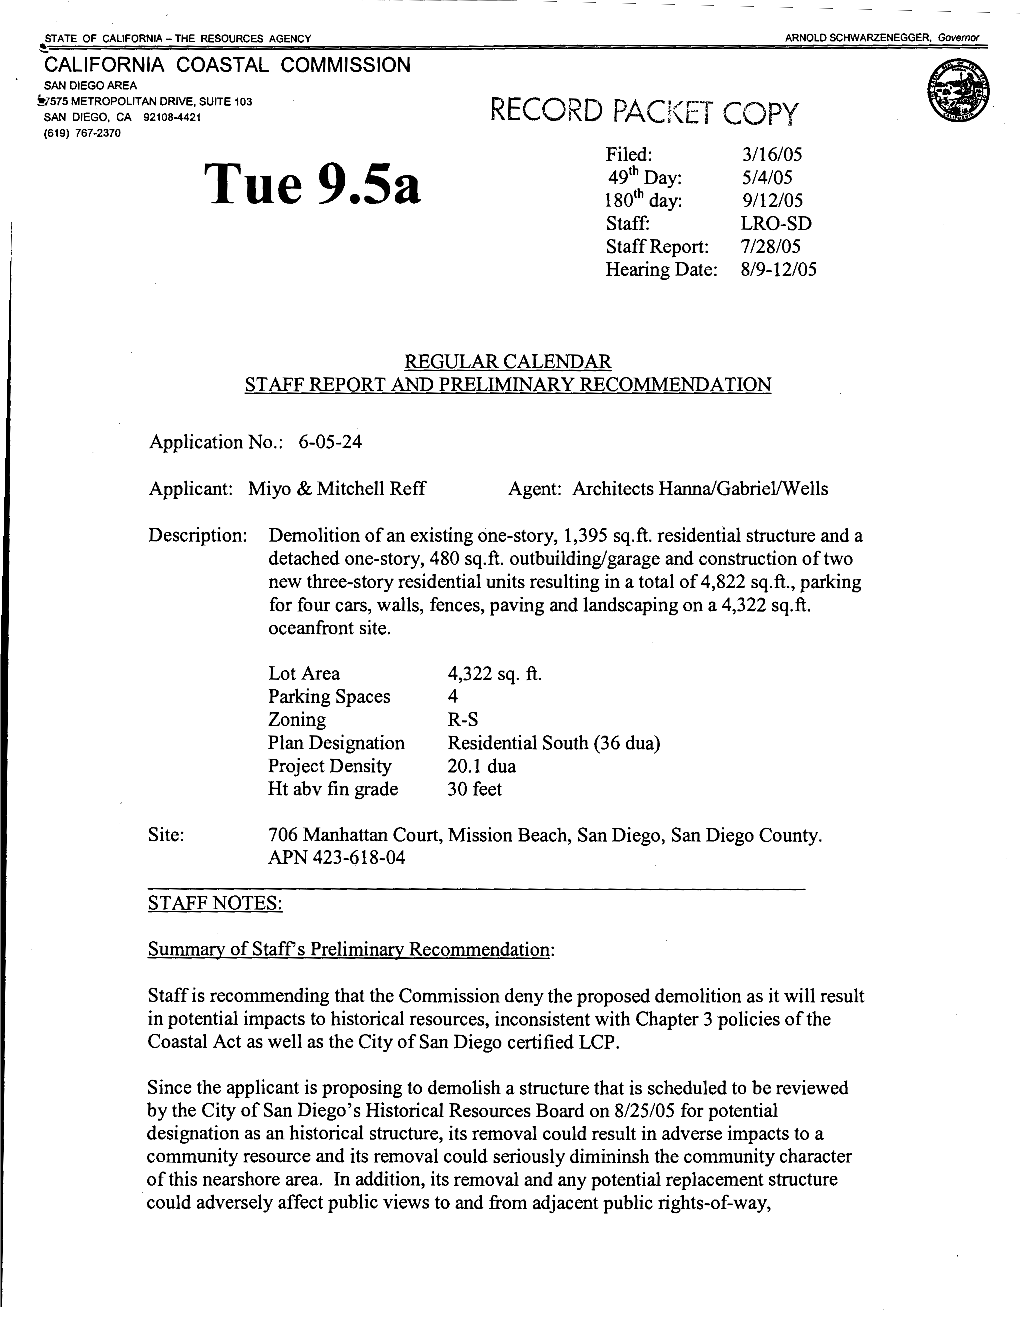 Tue 9.5A 180Th Day: 9/12/05 Staff: LRO-SD Staff Report: 7/28/05 Hearing Date: 8/9-12/05